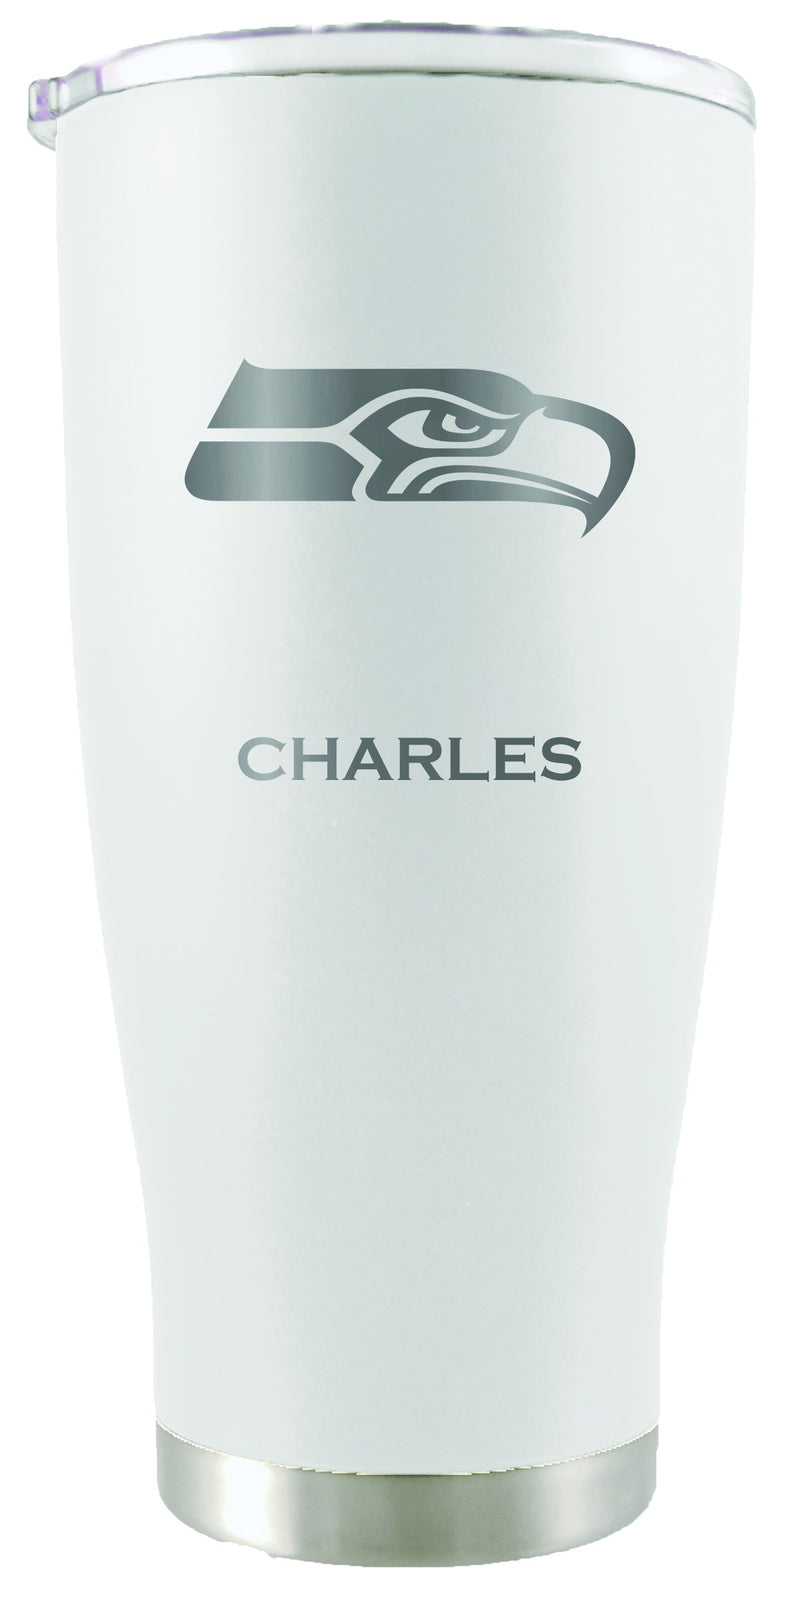 20oz White Personalized Stainless Steel Tumbler | Seattle Seahawks
20oz, CurrentProduct, Drinkware_category_All, NFL, Personalized_Personalized, Seattle Seahawks, SSH
The Memory Company